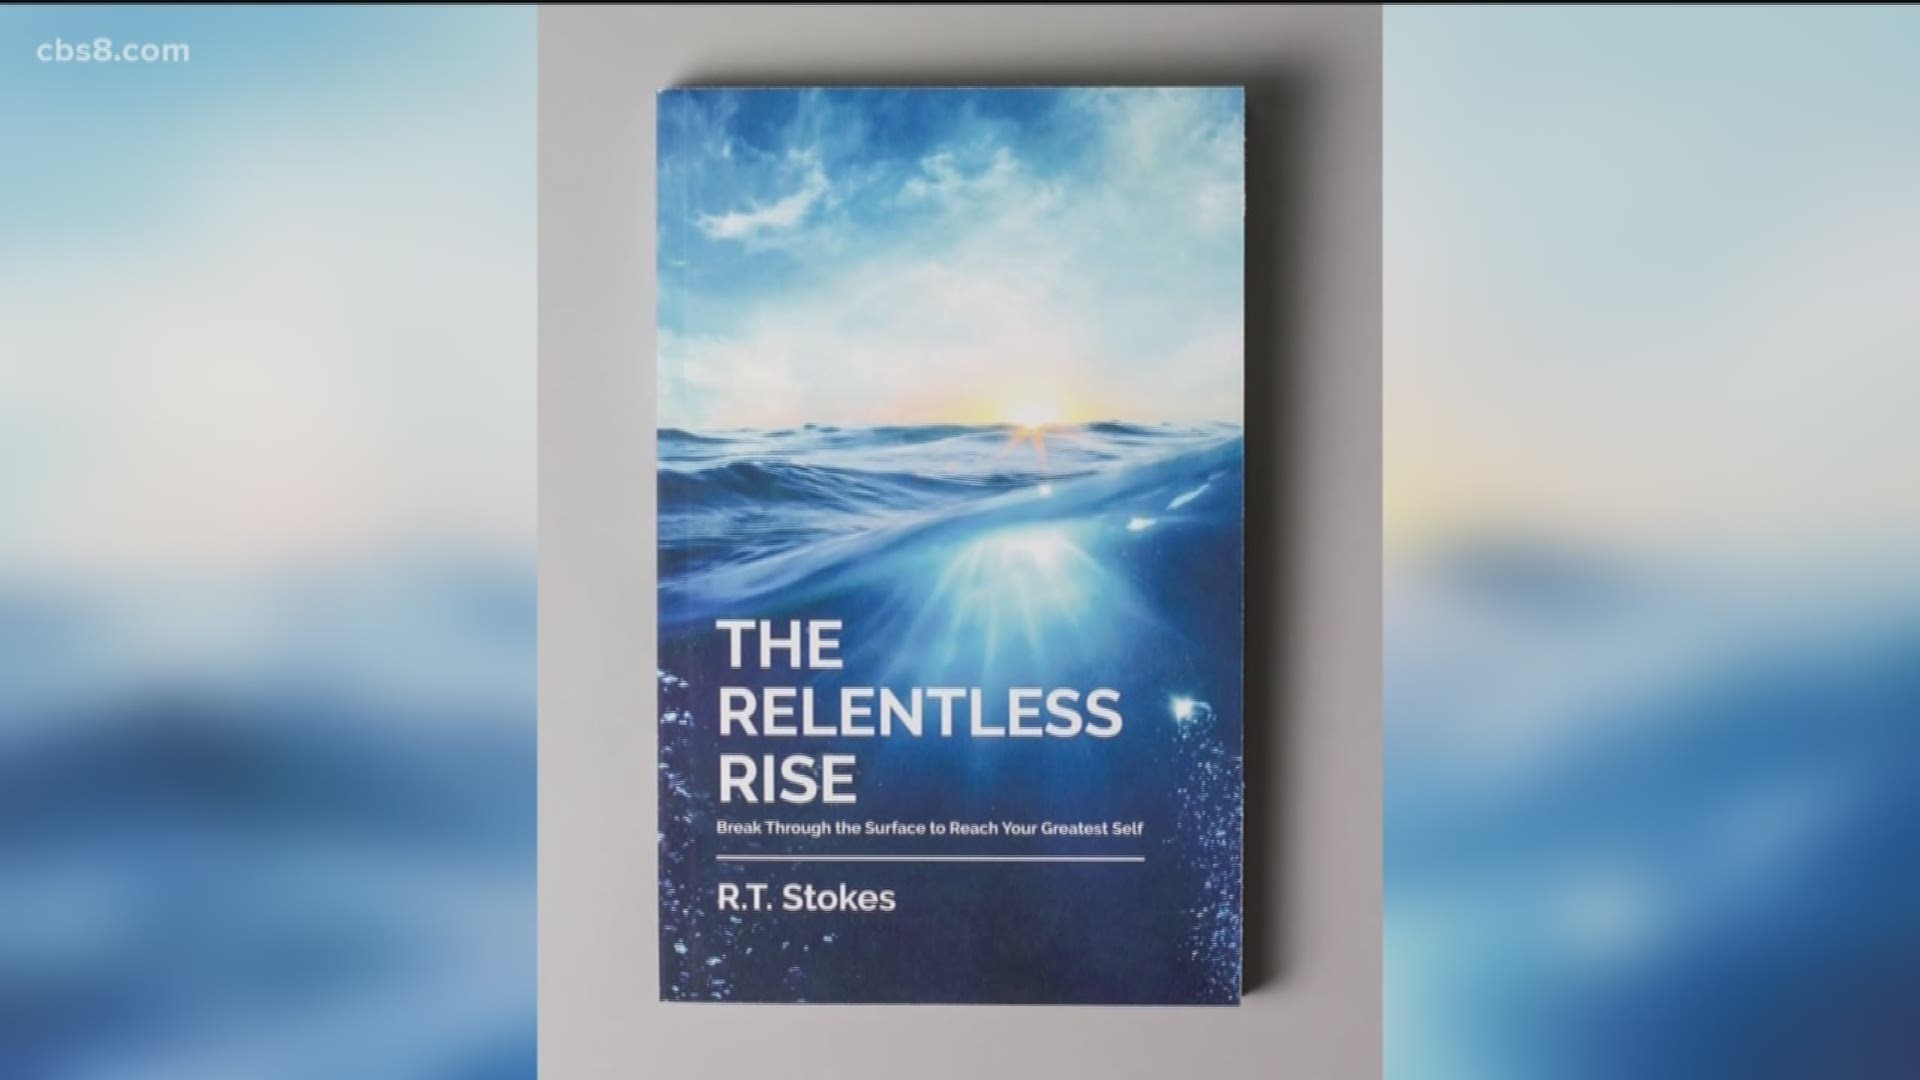 Navy veteran and author, RT Stokes, joined Morning Extra to talk about helping others dive beneath the surface to discover greater purpose waiting to rise.